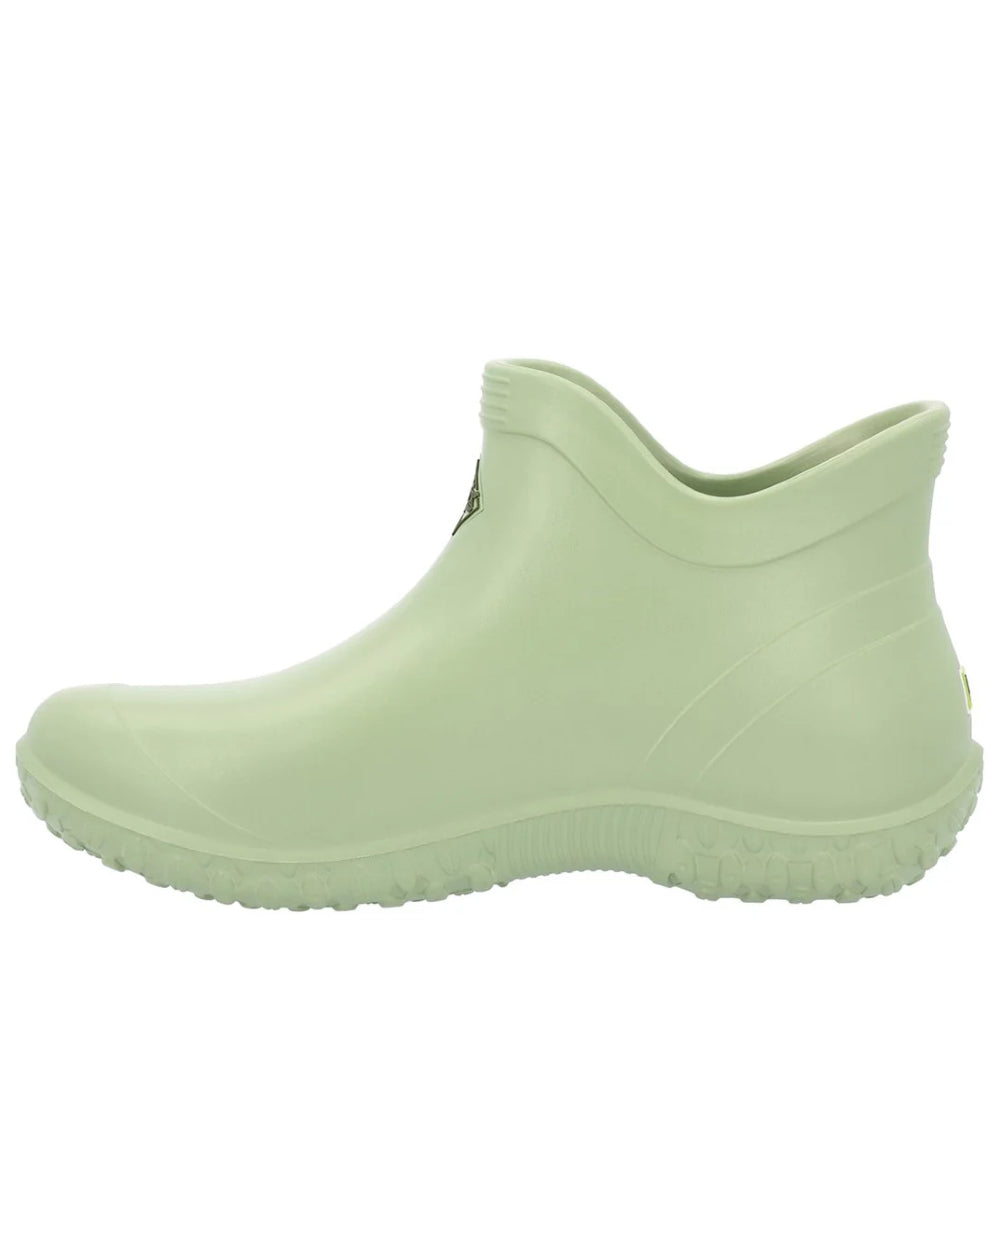 Resida Green Coloured Muck Boots Womens Muckster Lite Ankle Boots On A White Background 